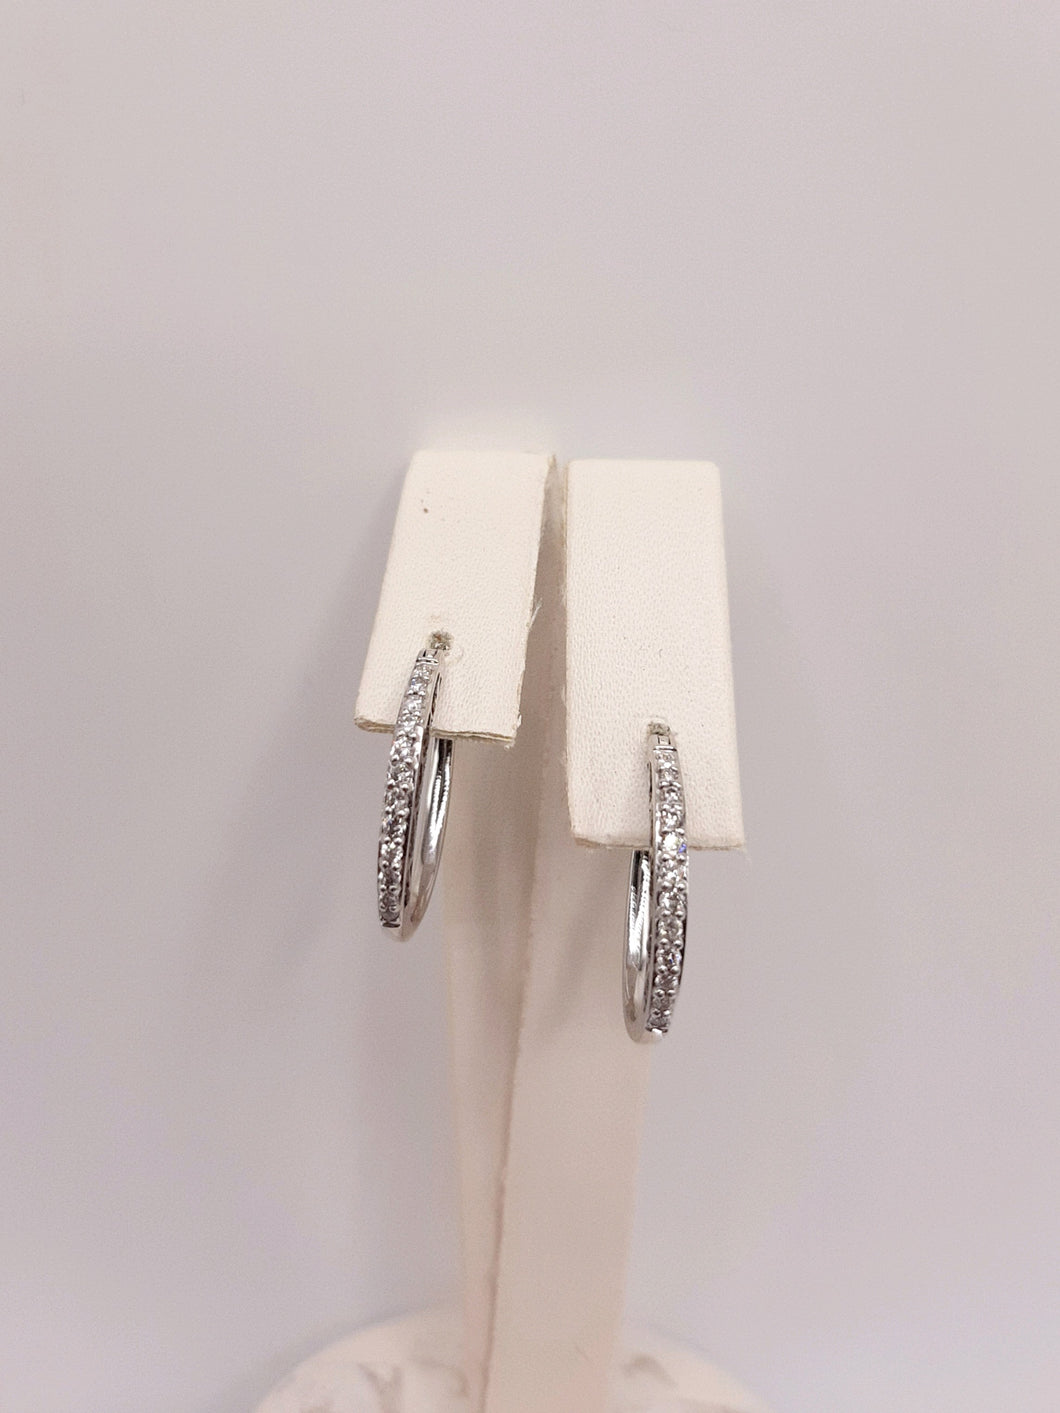 10Kt White Hoop Earrings Featuring .40 Carats of Both White and Black Diamonds